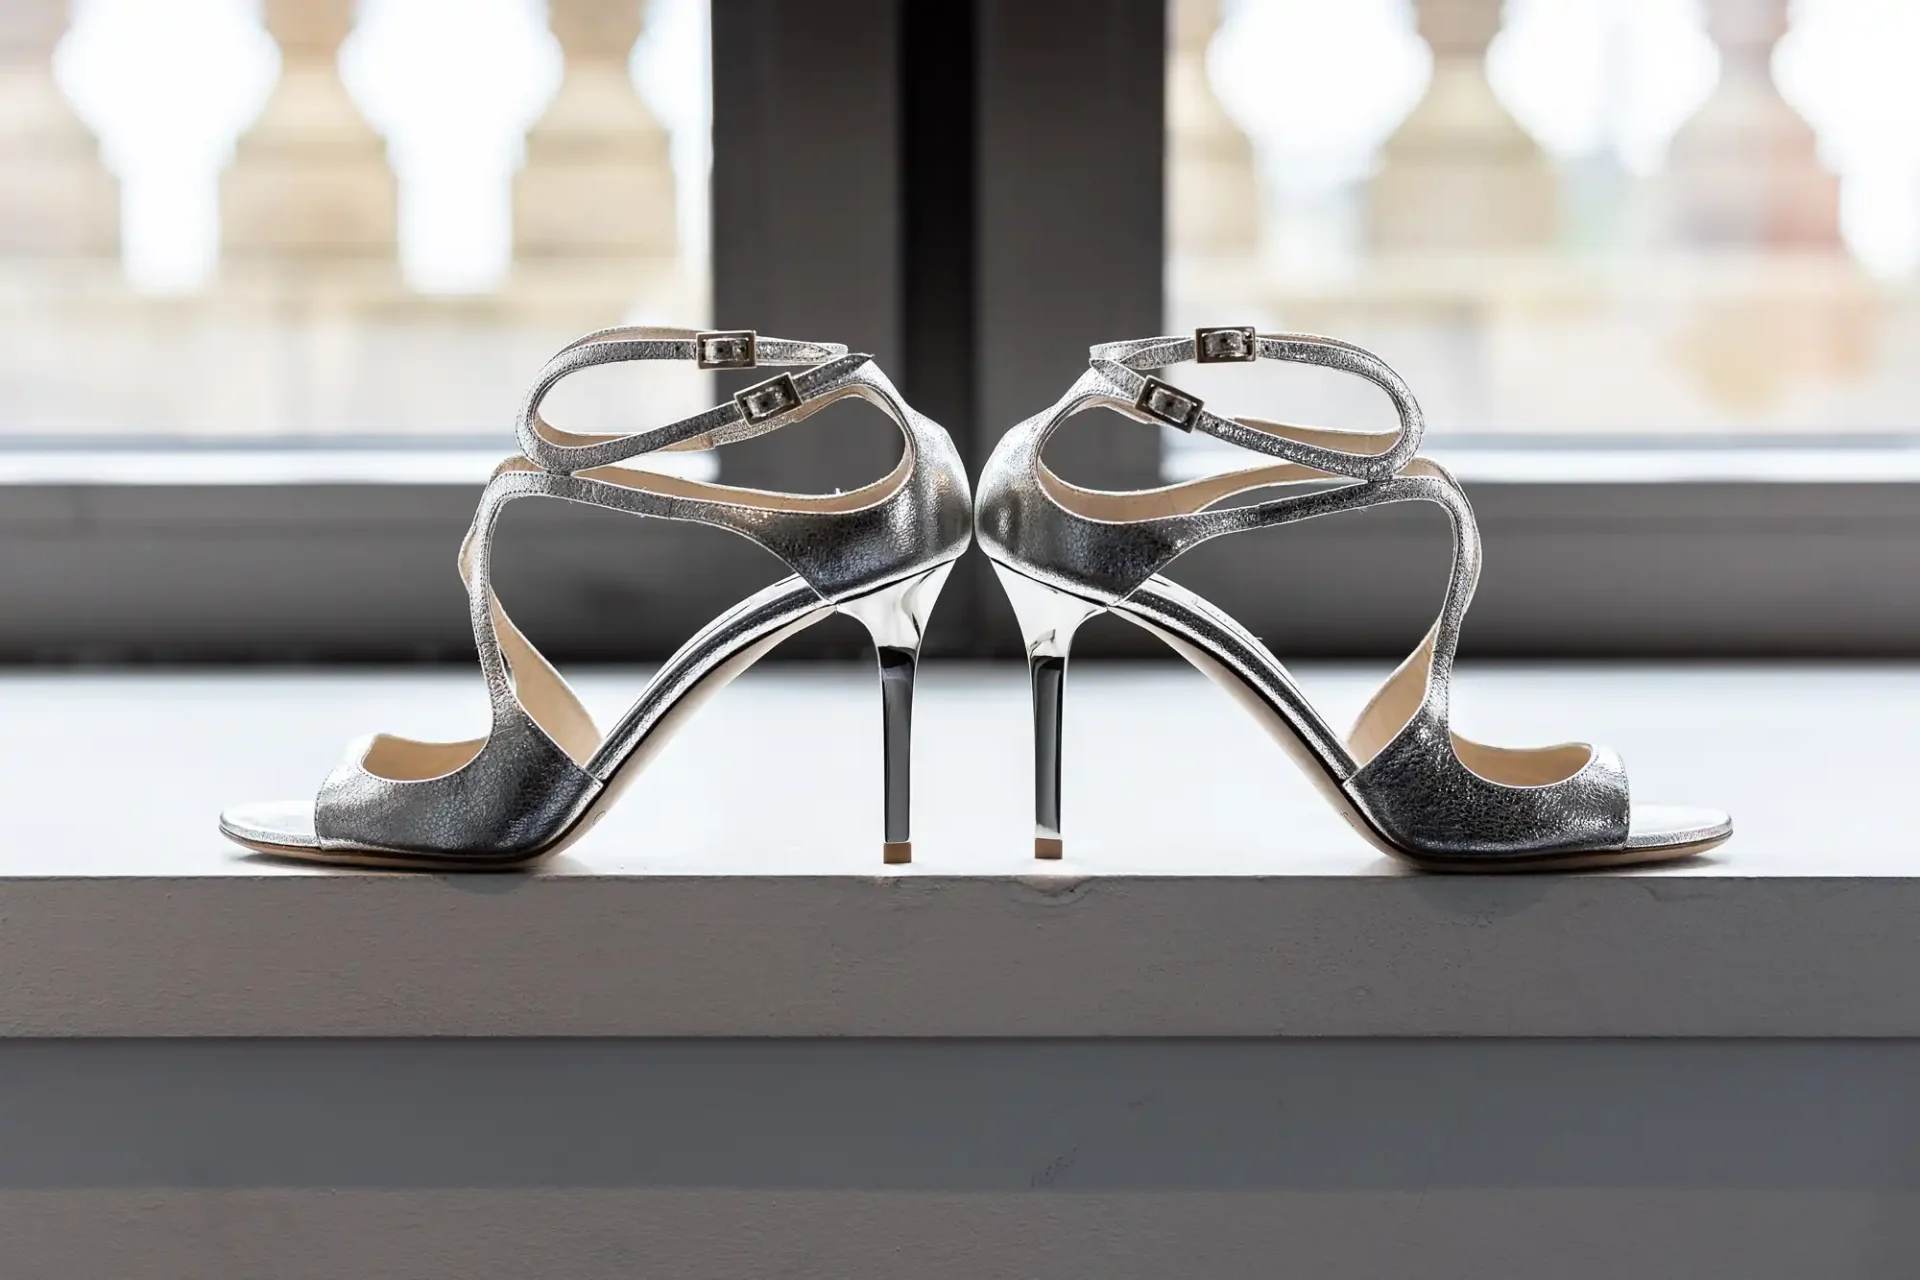 A pair of high-heeled, glittery silver sandals with ankle straps, displayed against a window with blurred background.